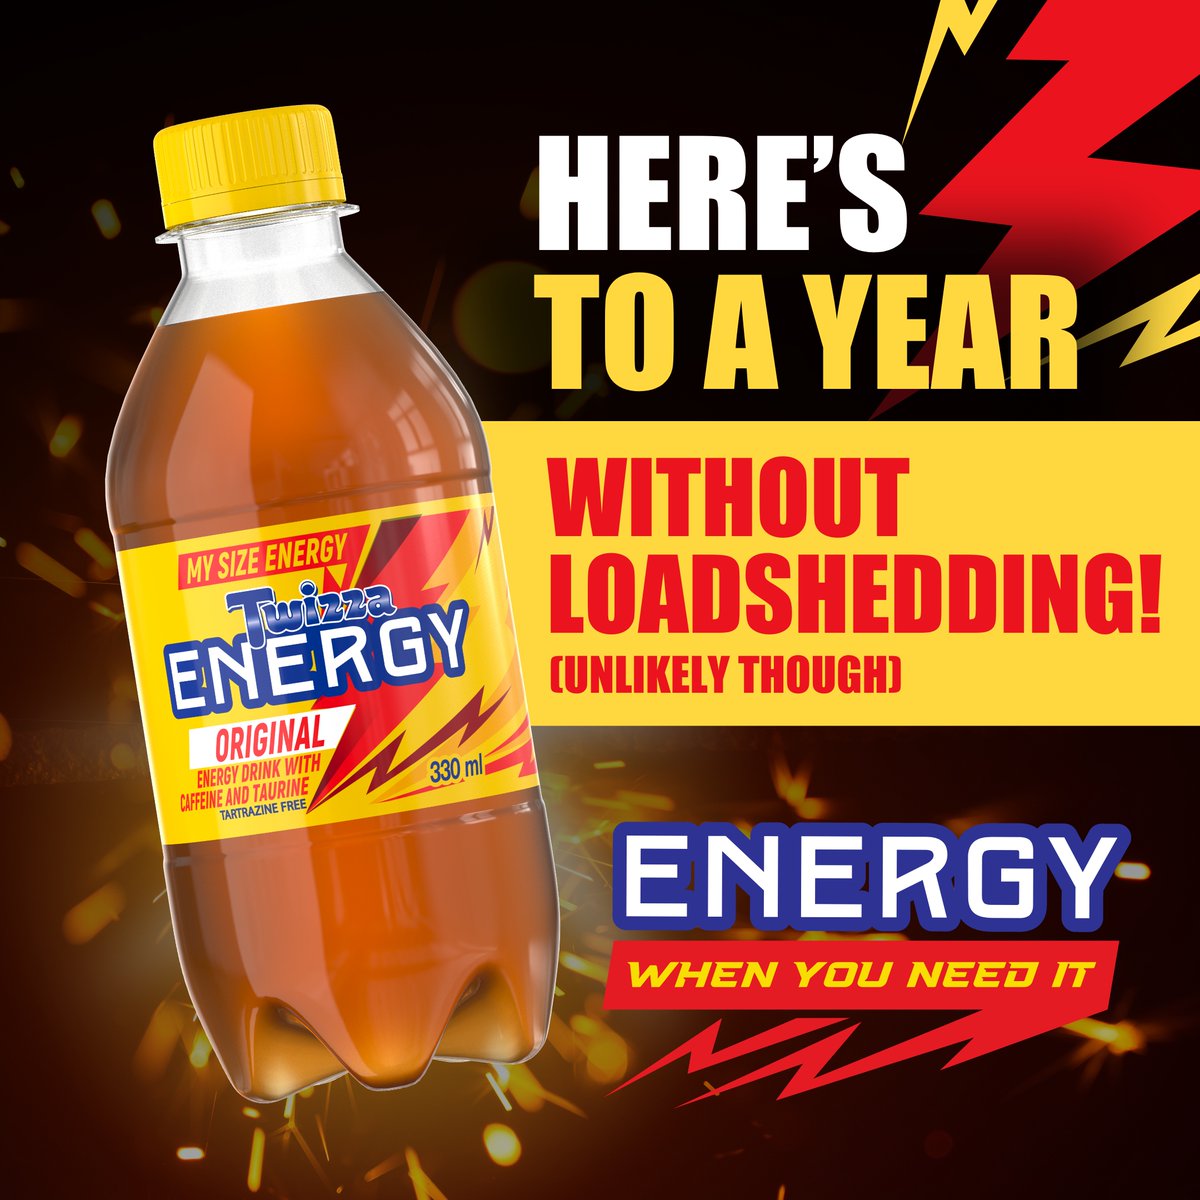 While we’re not sure what life will throw at us this year, the new resealable My Size Twizza Energy will give you ENERGY when you need it!

#TwizzaMySizeEnergy #EnergiseTheMoment